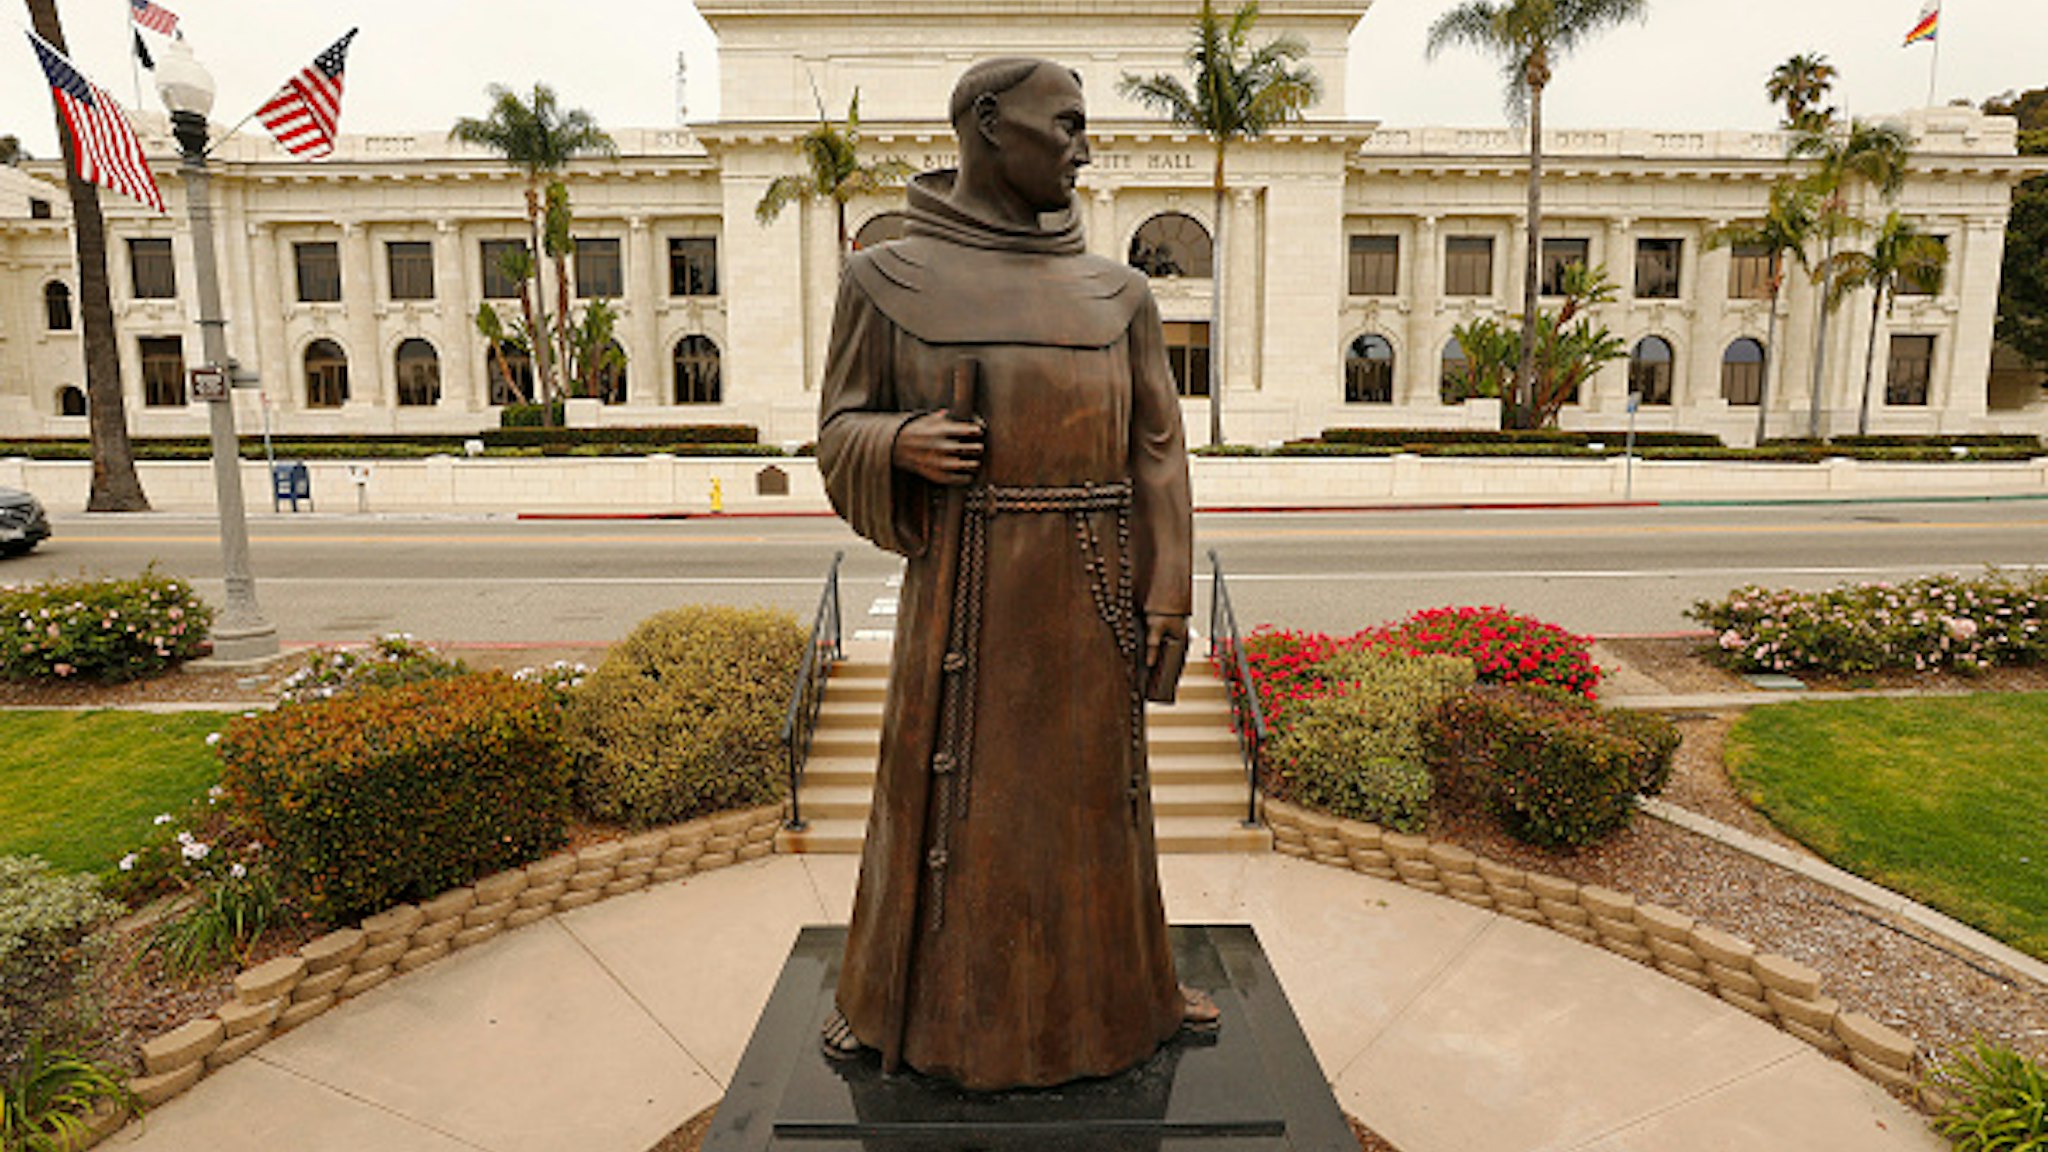 VENTURA, CA - JUNE 24: The bronze statue of Father Junipero Serra who founded nine Spanish missions in California including Mission San Buenaventura stands in front of Ventura City Hall. A joint statement was issued from local political, indigenous and Catholic leaders pledging to remove the monument, originally commissioned in the 1930s but replaced in 1989. The time has come for the statue to be taken down and moved to a more appropriate nonpublic location, read the statement, issued by Ventura Mayor Matt LaVere. After a protest last weekend Ventura city spokeswoman Heather Sumagaysay said the city is making plans to host community discussions regarding the Serra statue and there is no timeline for its removal, she said. It is our priority to be receptive to public concerns and provide an environment where all voices are heard and respected. A historic decision such as this will involve the voices of the Chumash tribe, the City Council and the residents of Ventura, Sumagaysay said in an emailed statement. The city remains committed to collaborating with the community to determine next steps. We will inform the public of opportunities to participate and offer input at a future meeting. The move comes after a Father Serra statue was toppled last weekend on Olvera St. in downtown Los Angeles and people were considering changing the name of Ft Bragg, but voted the change down. Ventura City Hall on Wednesday, June 24, 2020 in Ventura, CA.